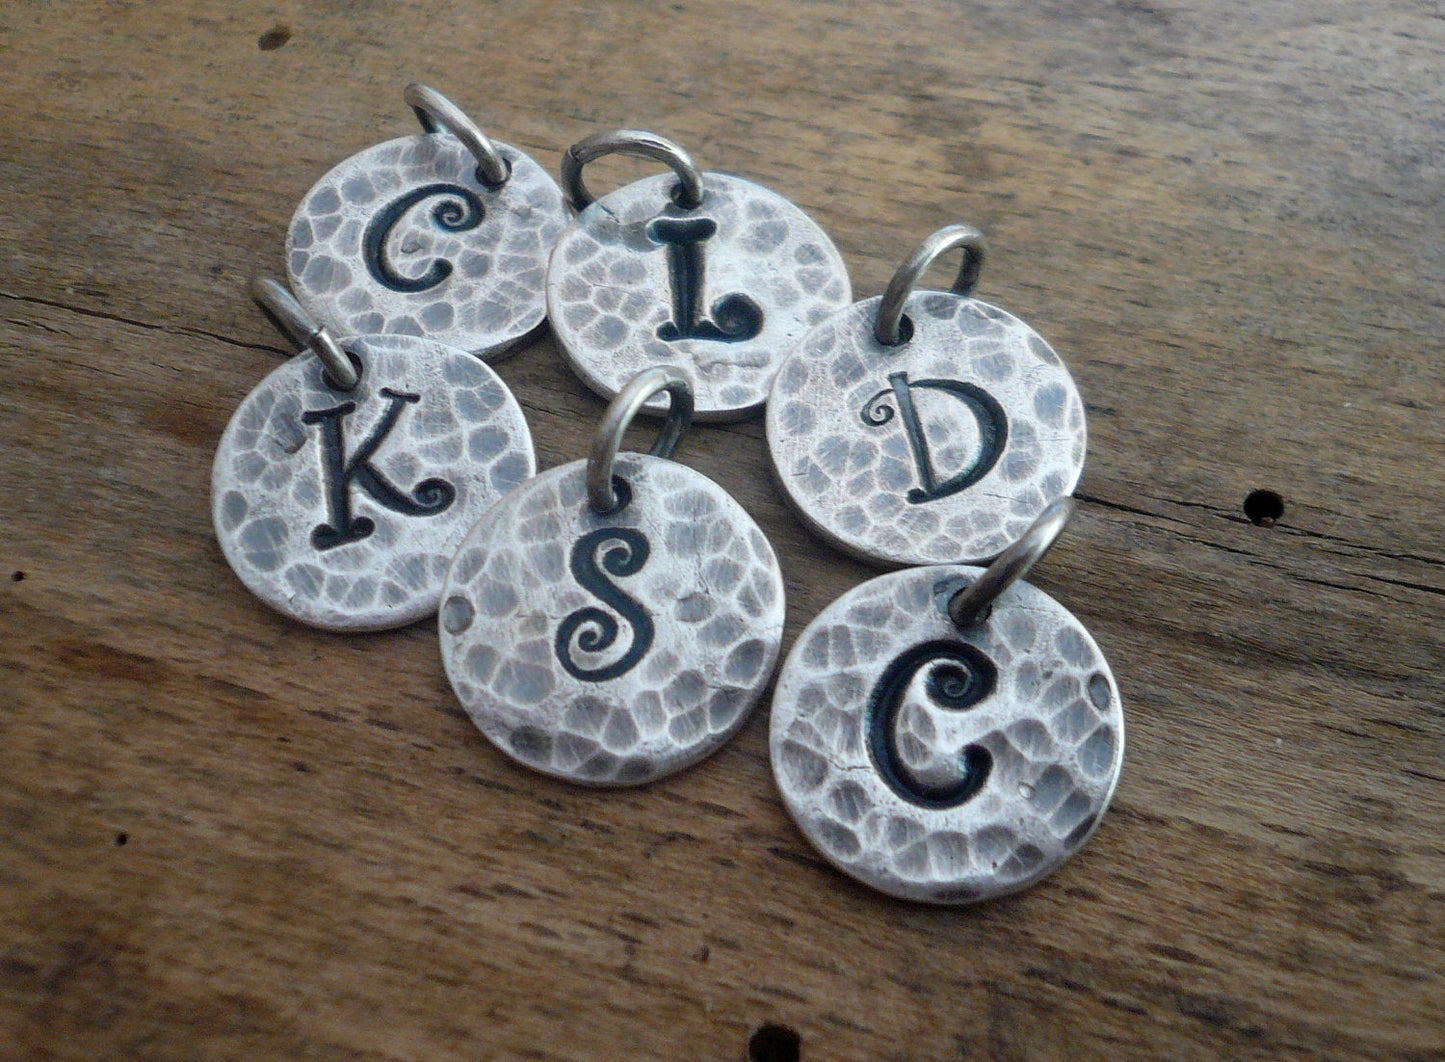 Hammered Initial Pendant Upper Case- Handmade. Personalized. Oxidized Fine Silver